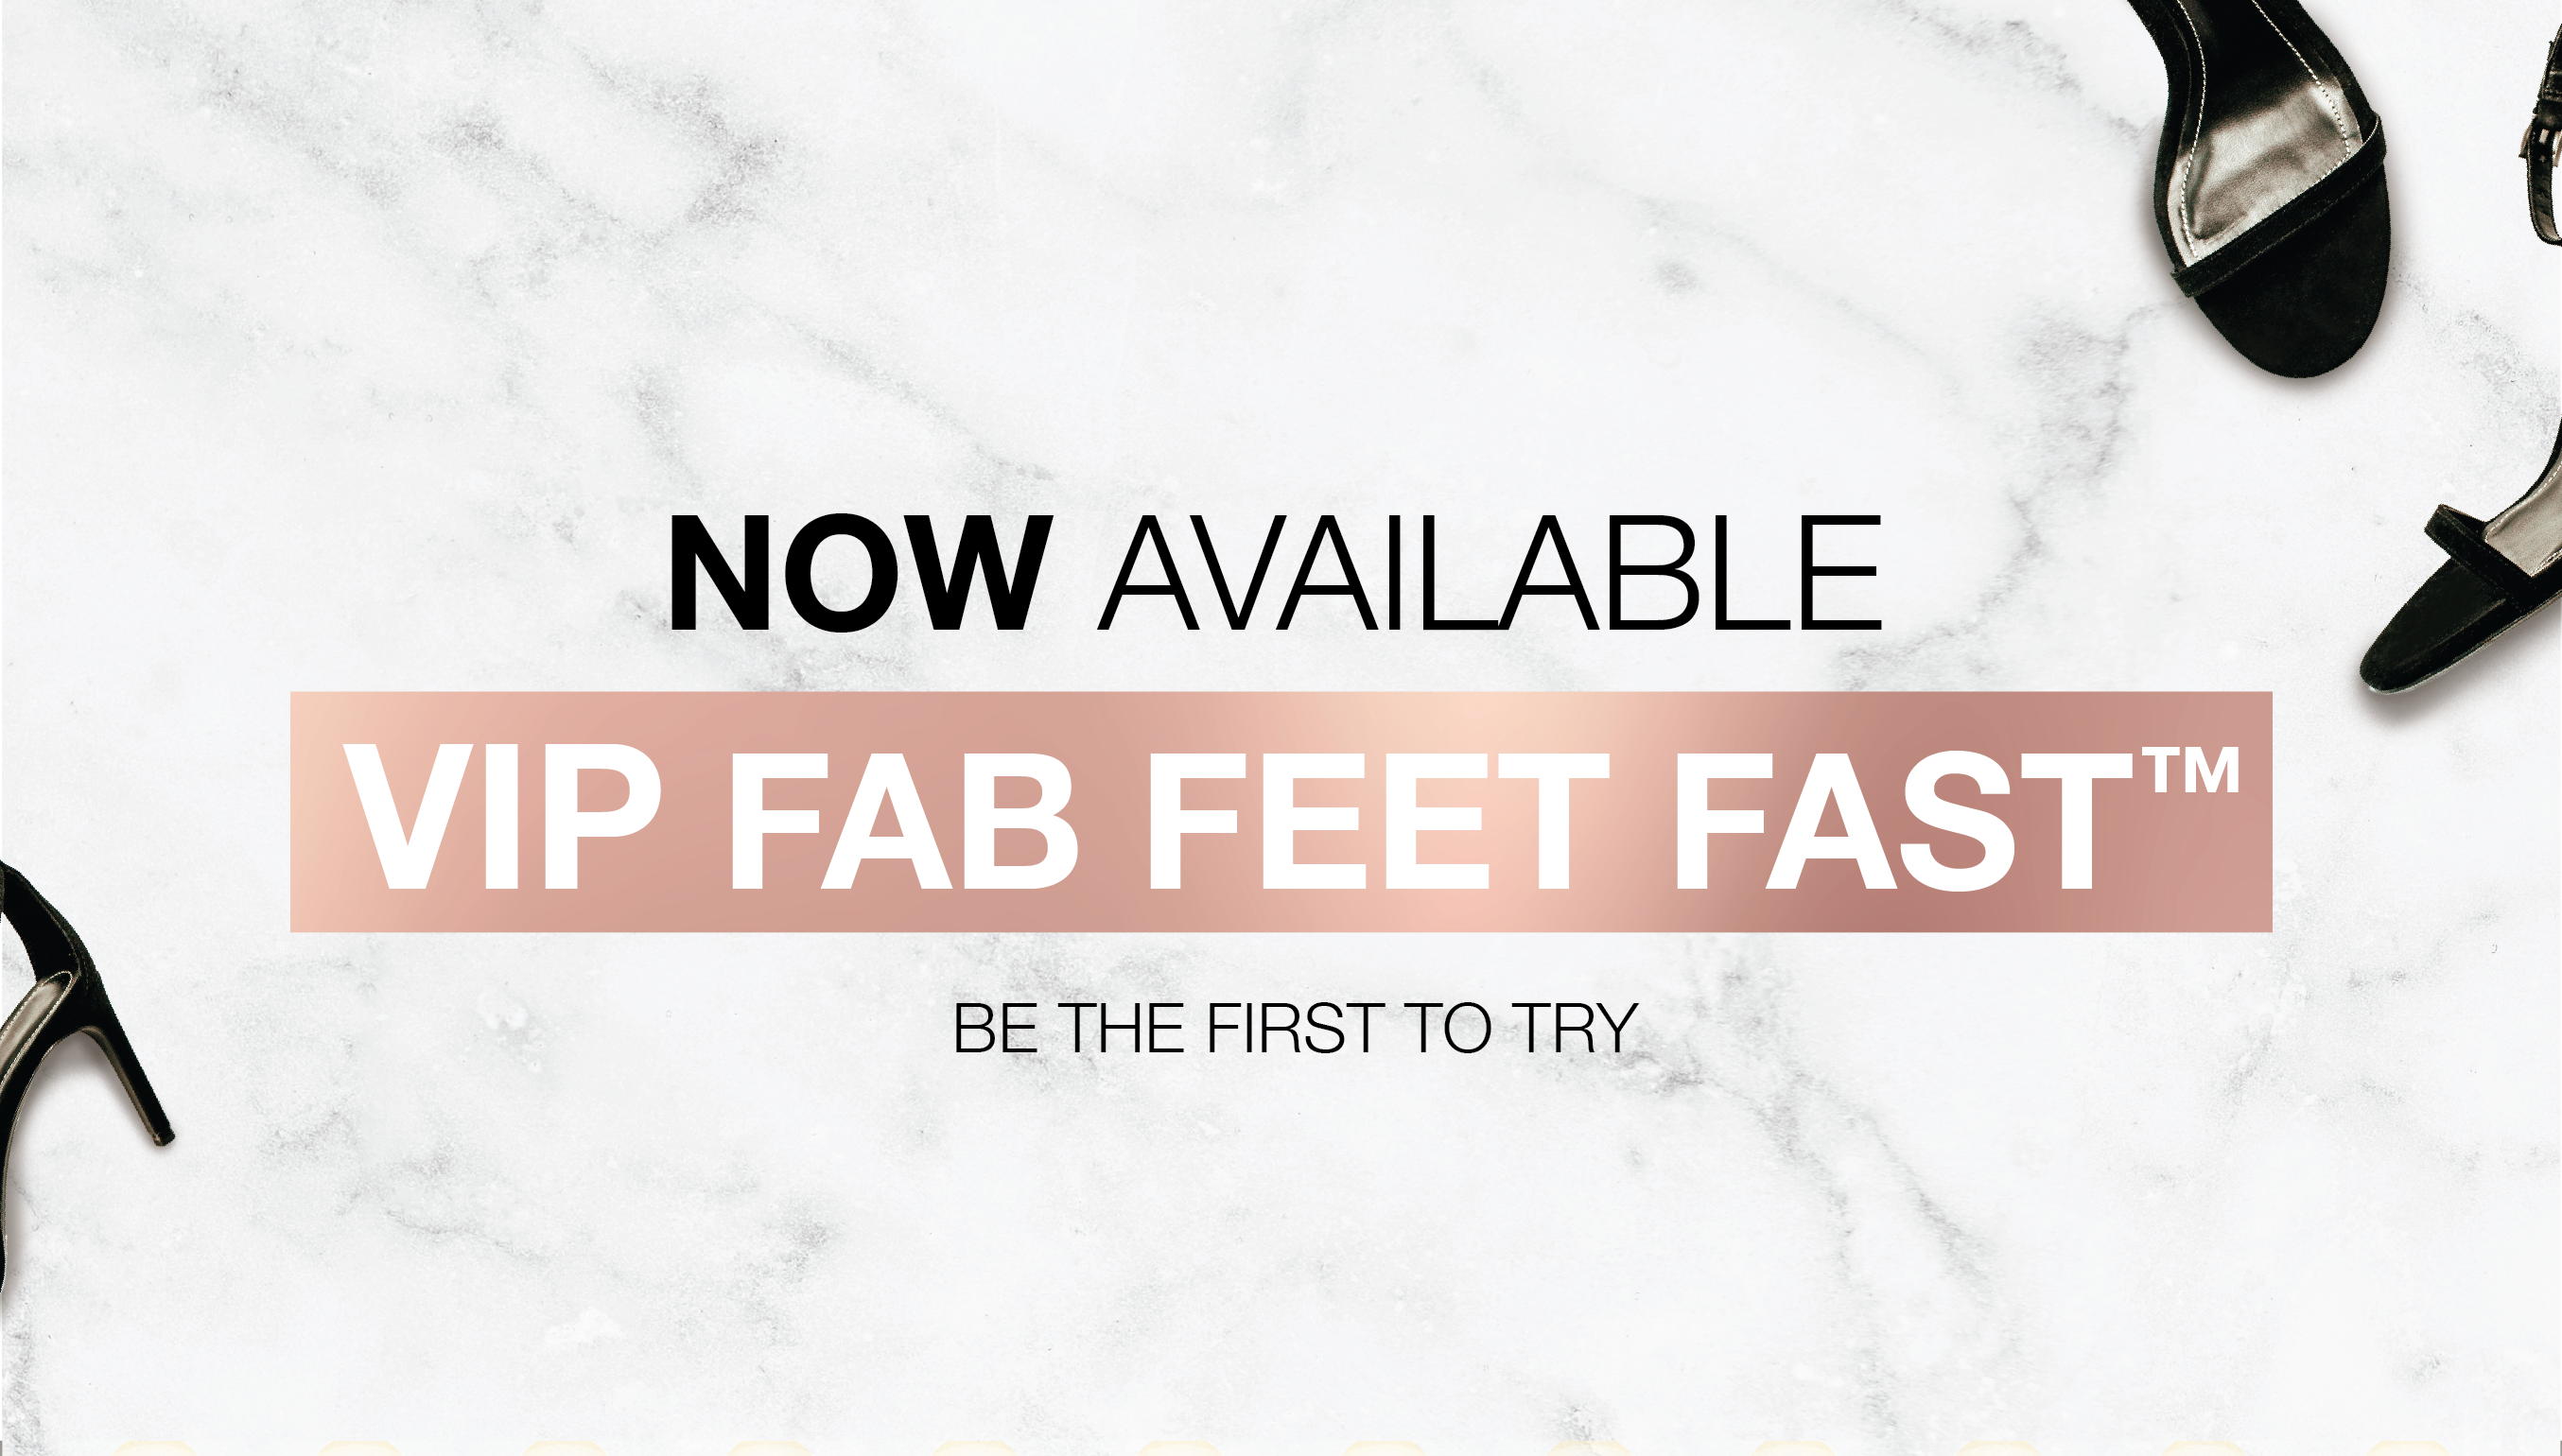 Now available, VIP FAB FEET FAST. Be the first to try